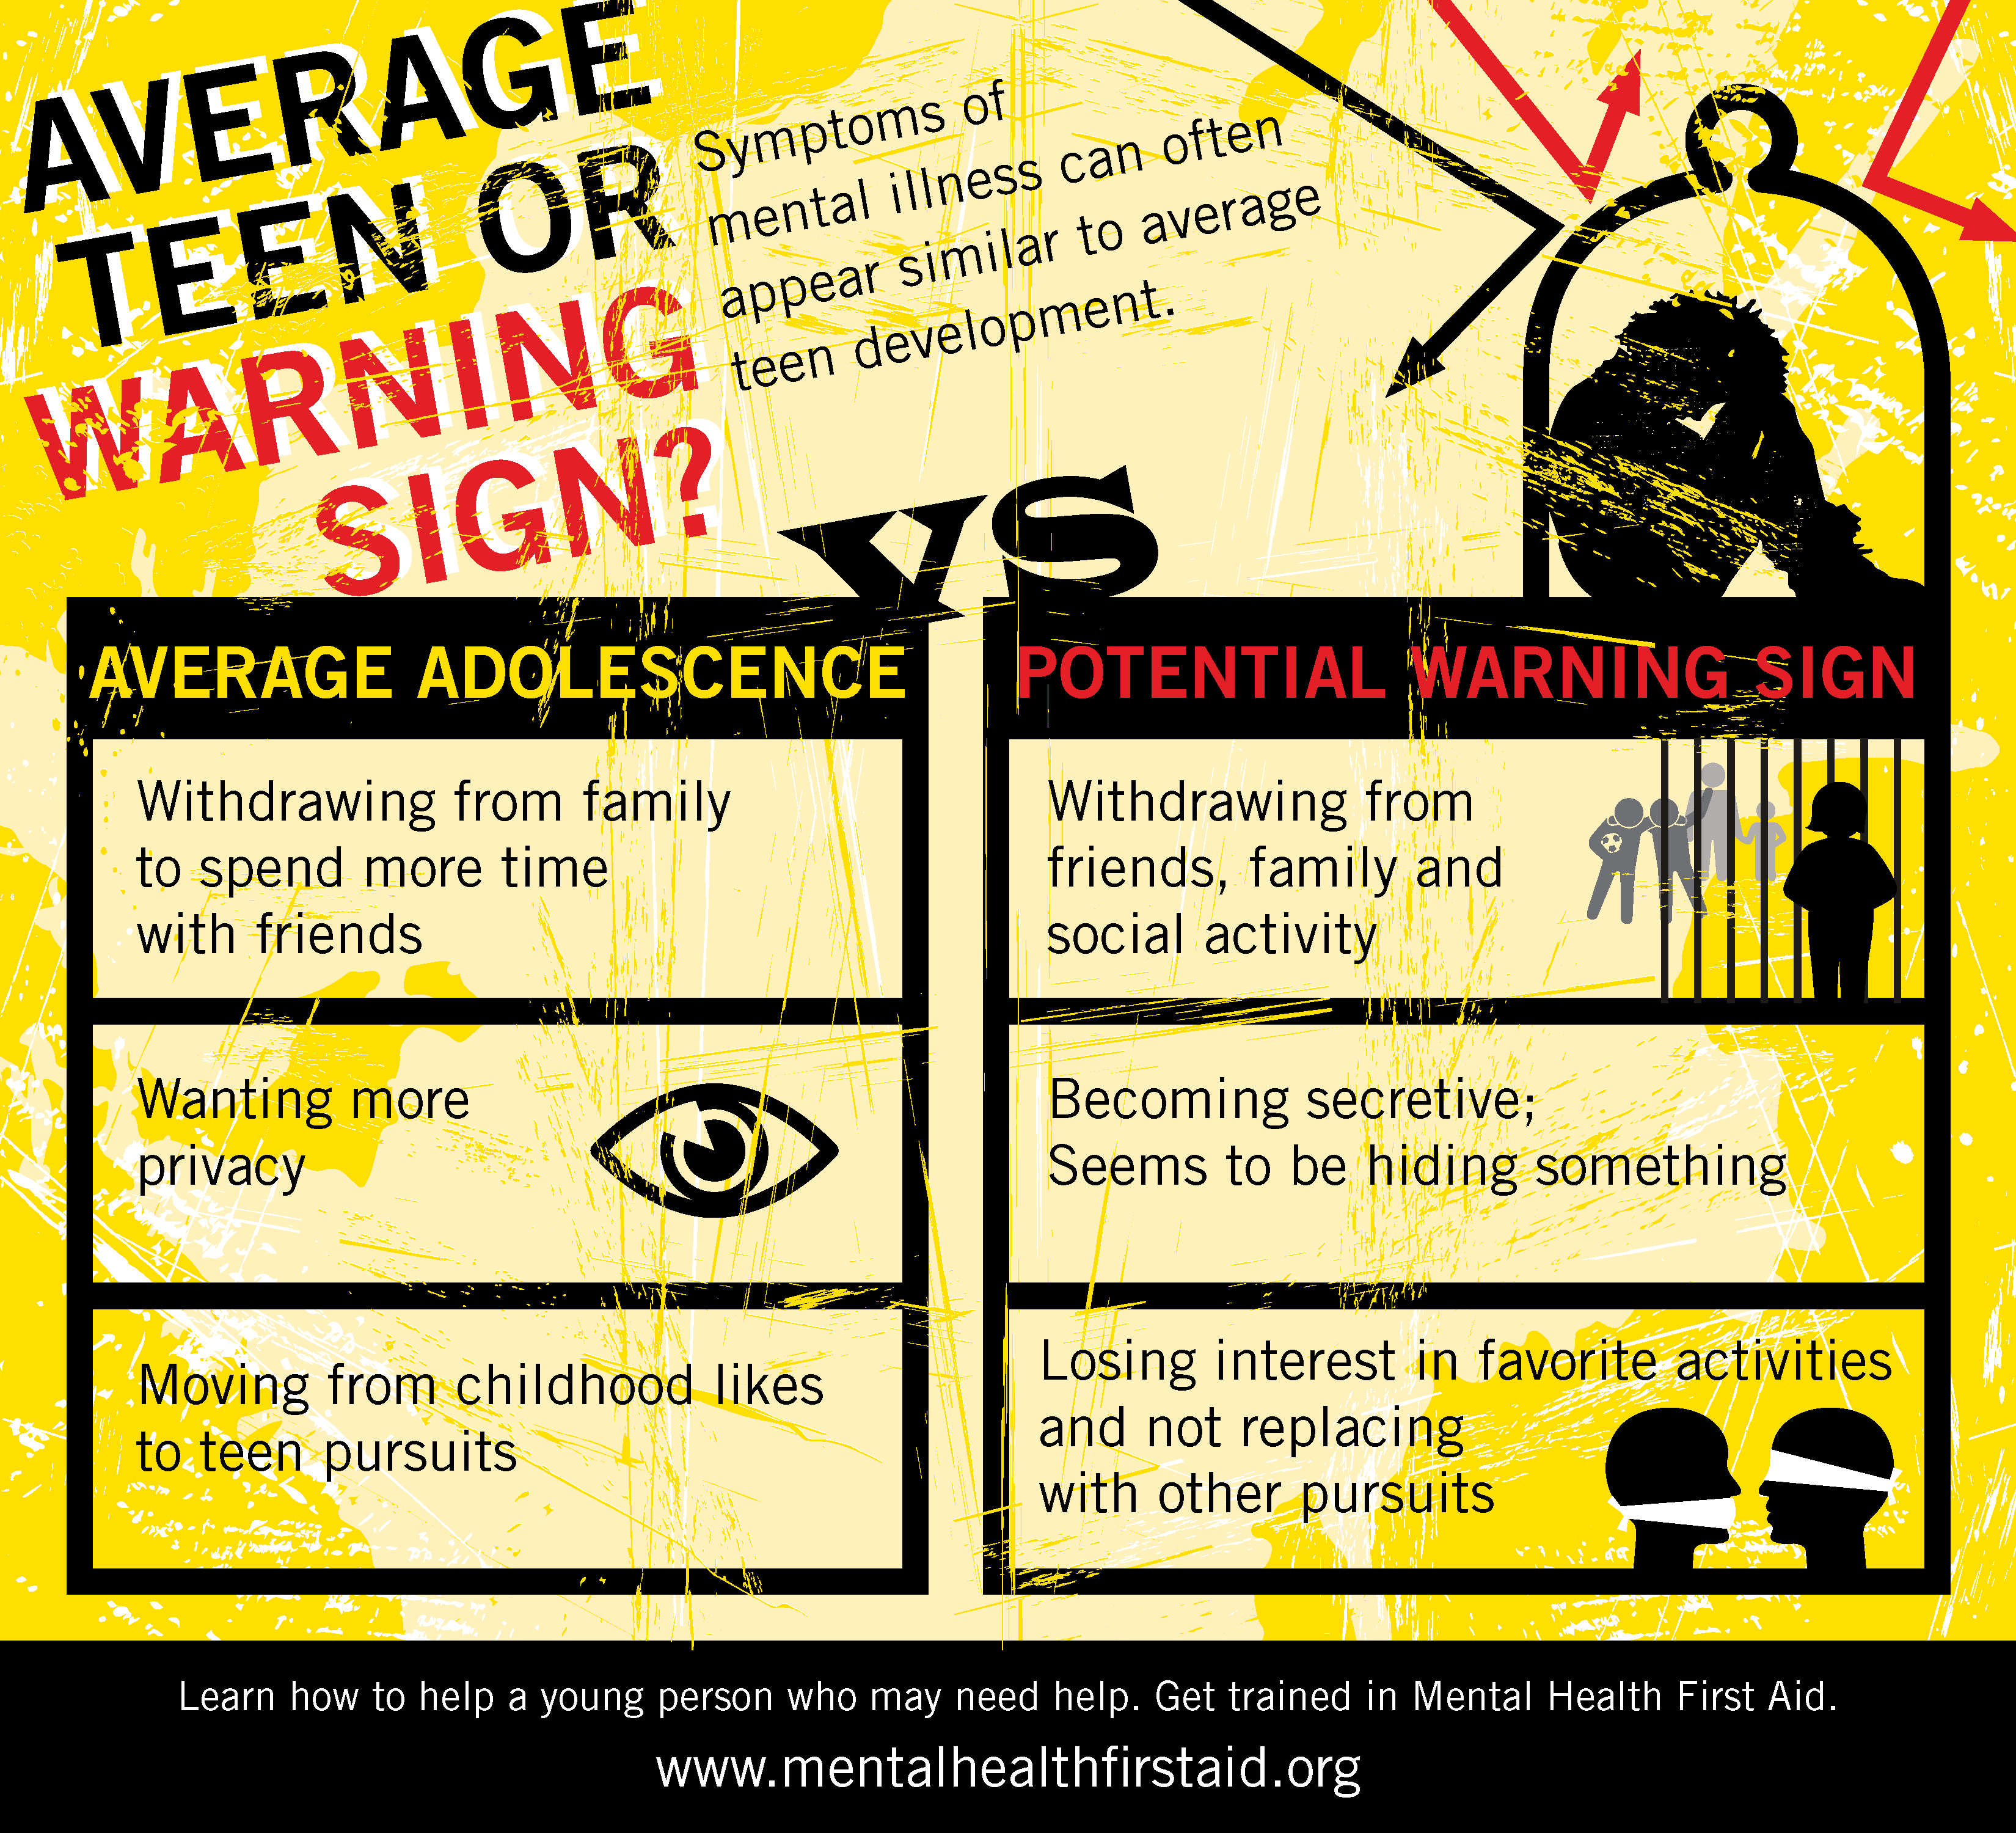 Suicide Warning Signs - A Mental Health Poster